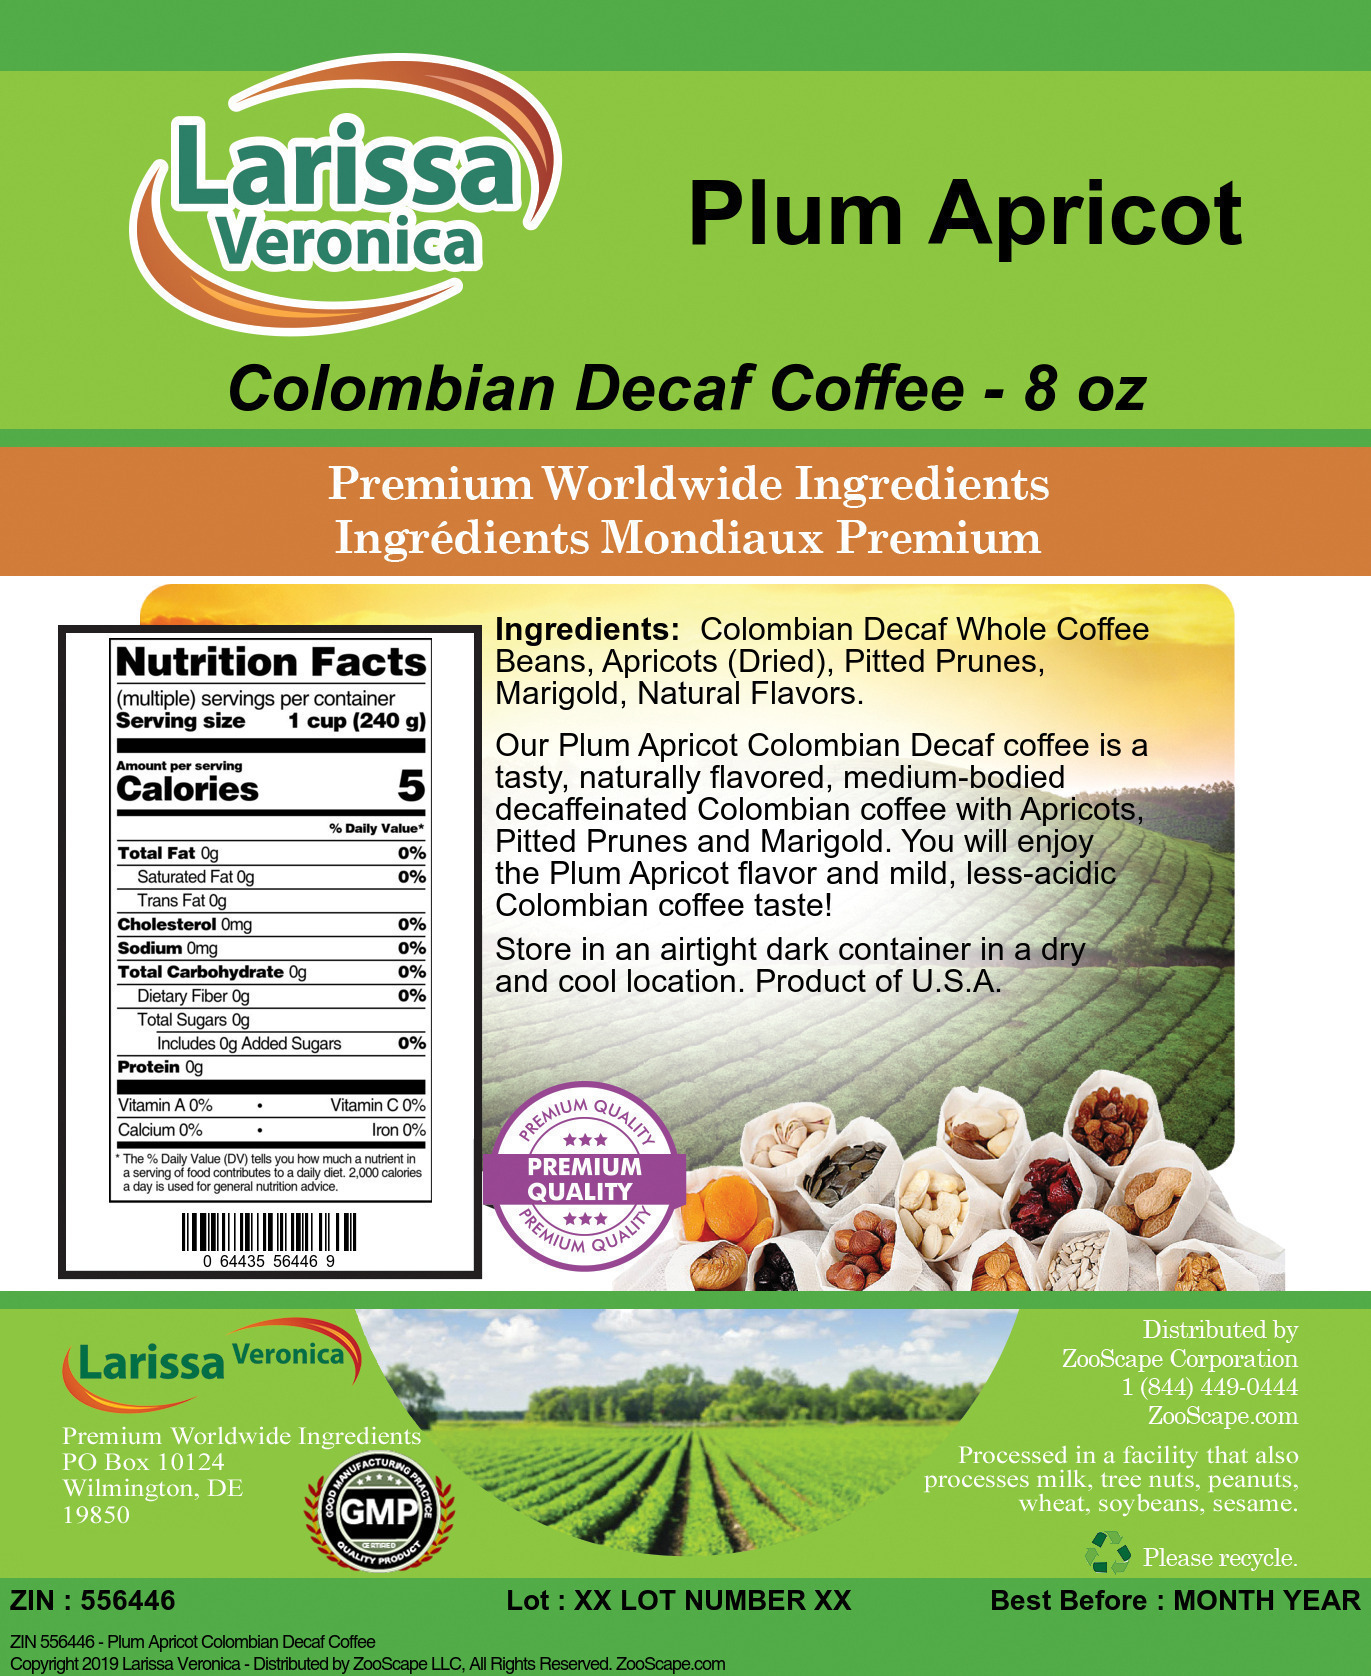 Plum Apricot Colombian Decaf Coffee - Label